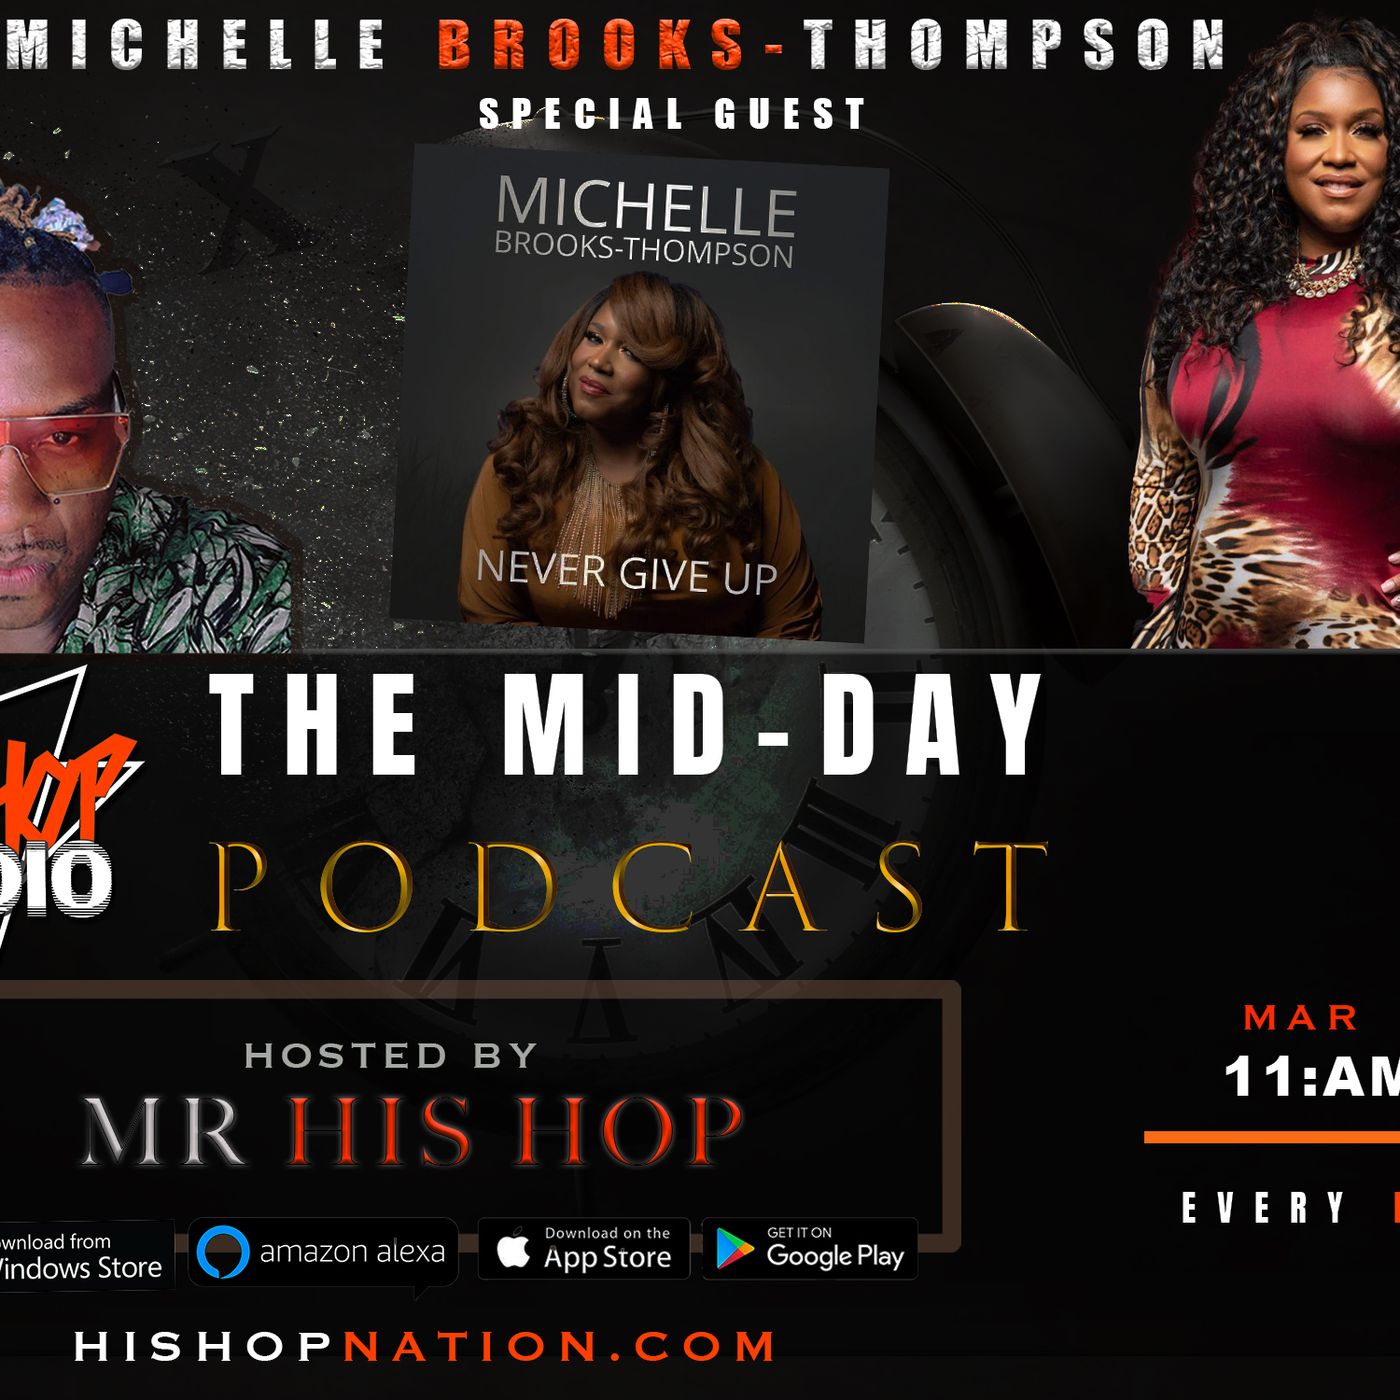 EPISODE 92 - HIS HOP PODCAST NETWORK - MICHELLE BROOKS THOMSON ON HIS HOP RADIO